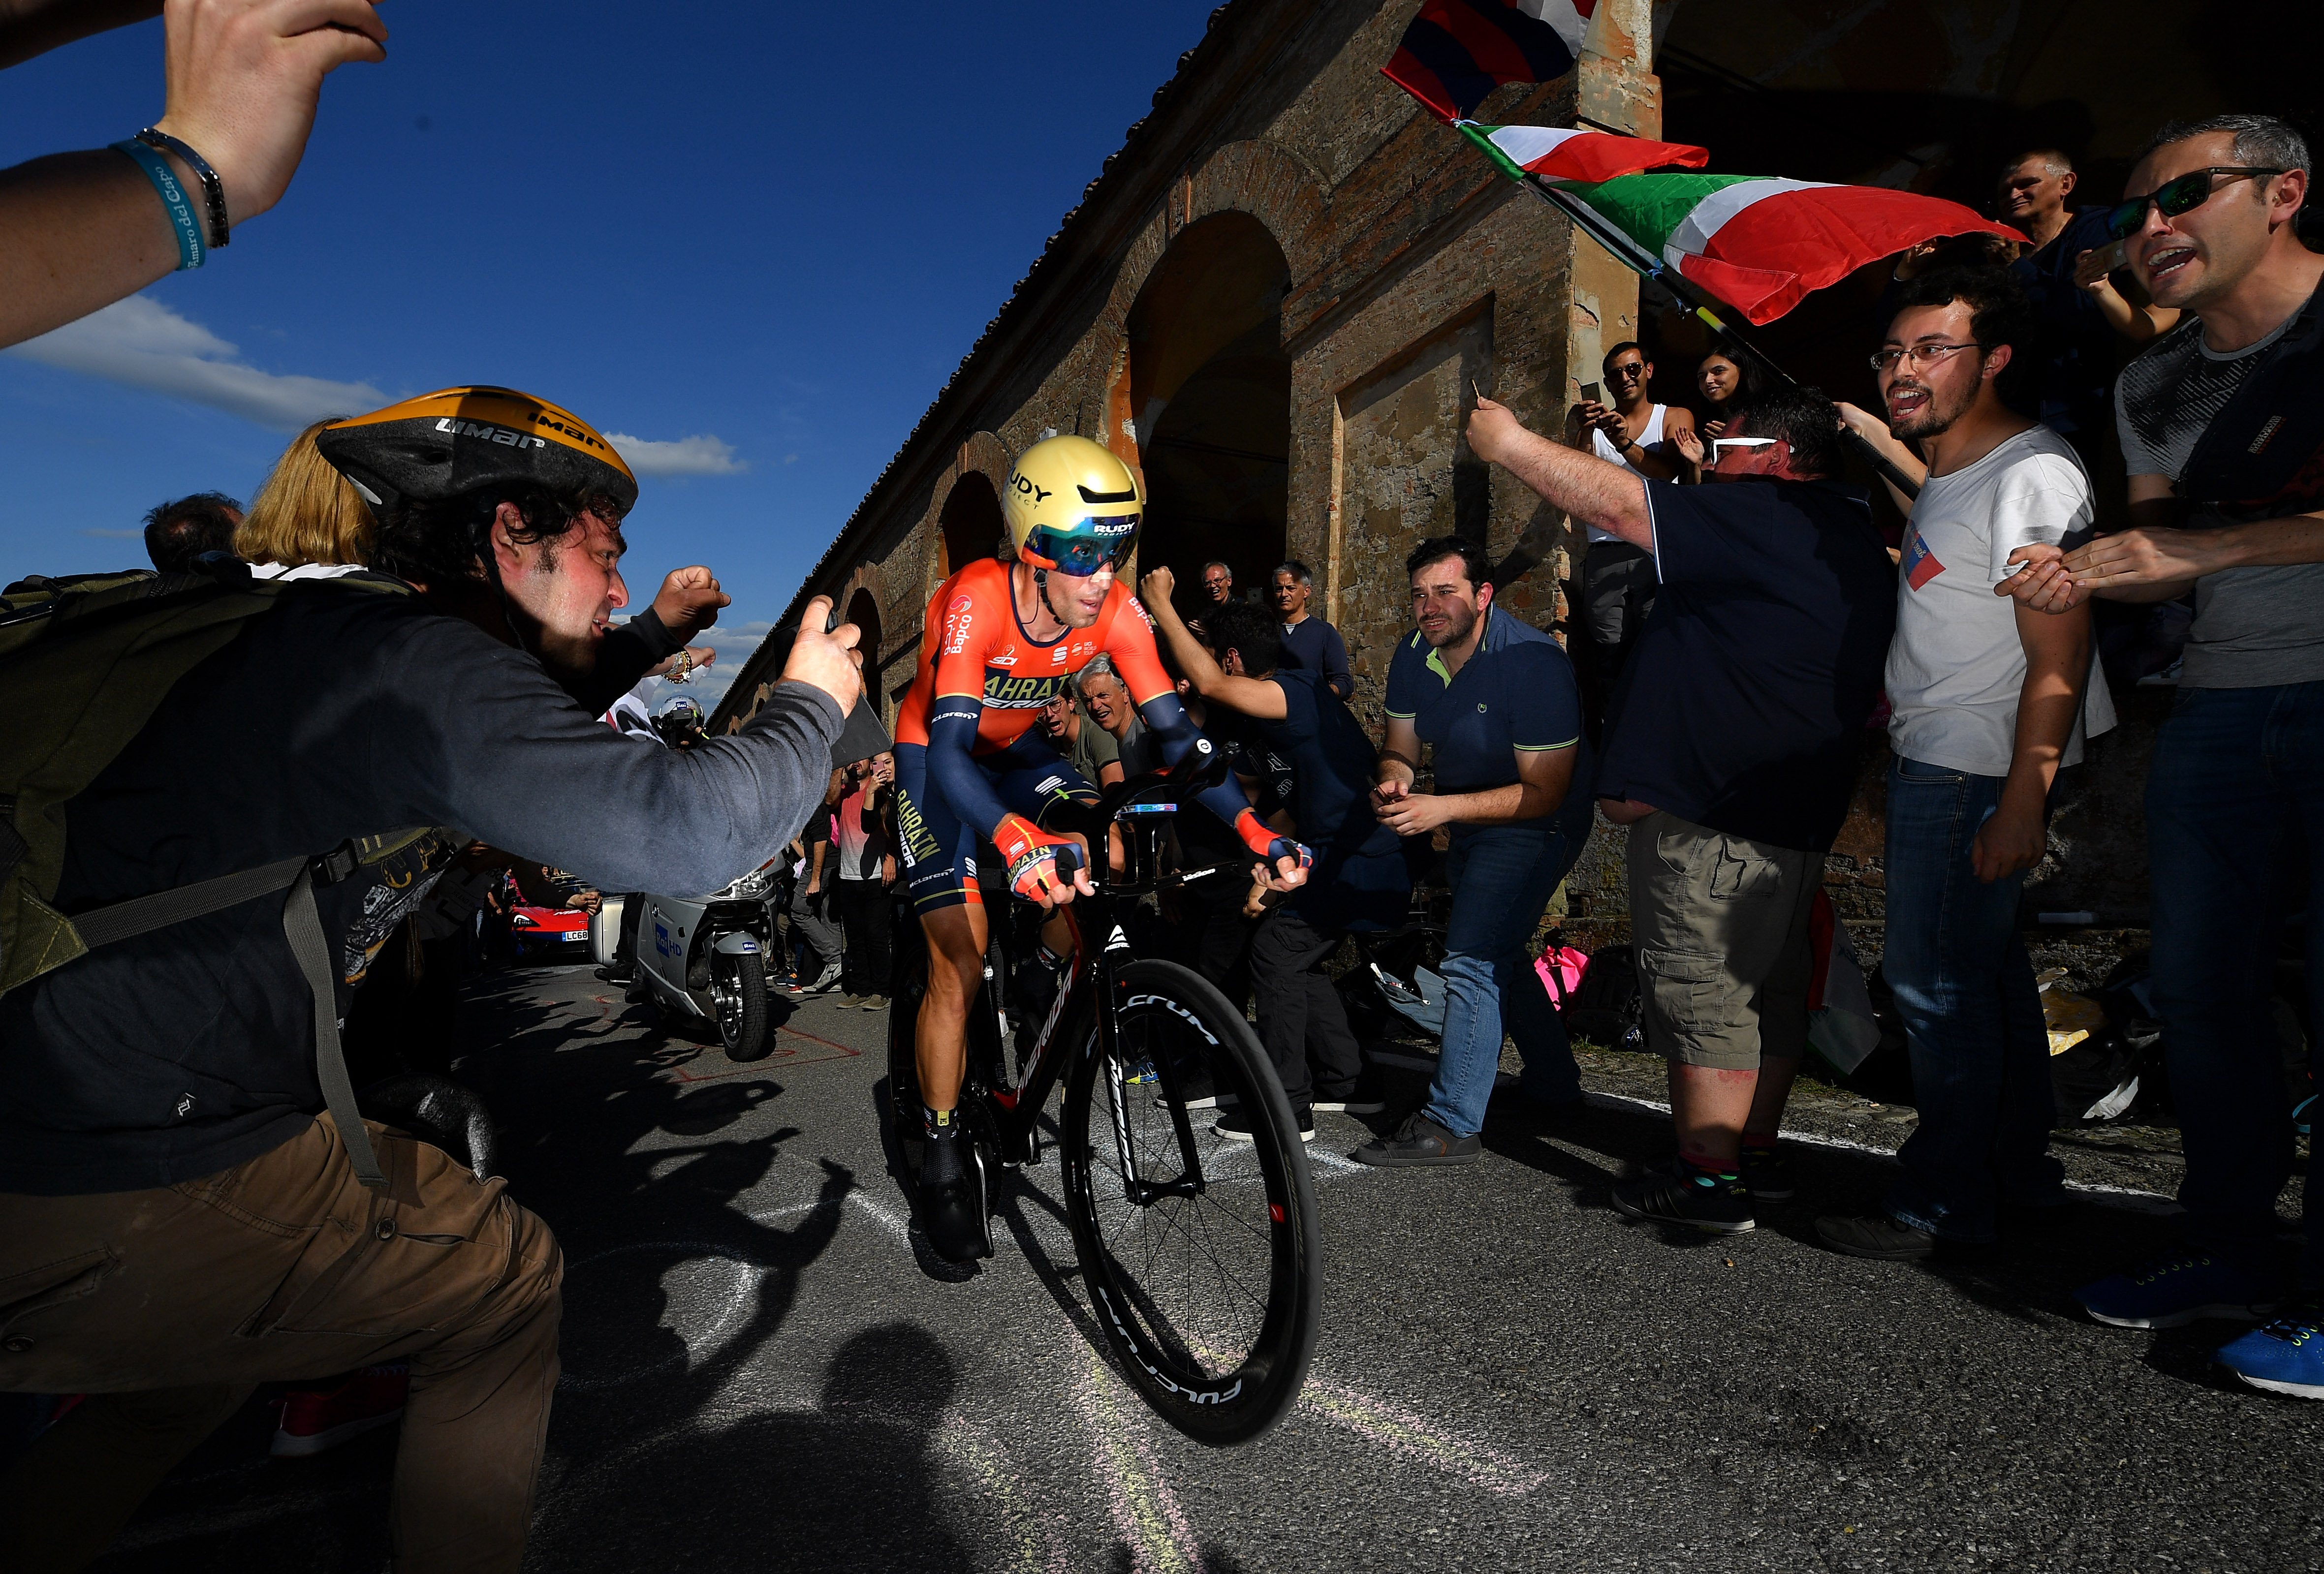 BOLOGNA, ITALY - MAY 11: Vincenzo Nibali of Italy and Team Bahrain - Merida / Public / Fans / during the 102nd Giro d’Italia 2019, Stage 1 a 8km Individual Time Trial from Bologna to San Luca-Bologna 274m / ITT / Tour of Italy / #Giro / @giroditalia / on 